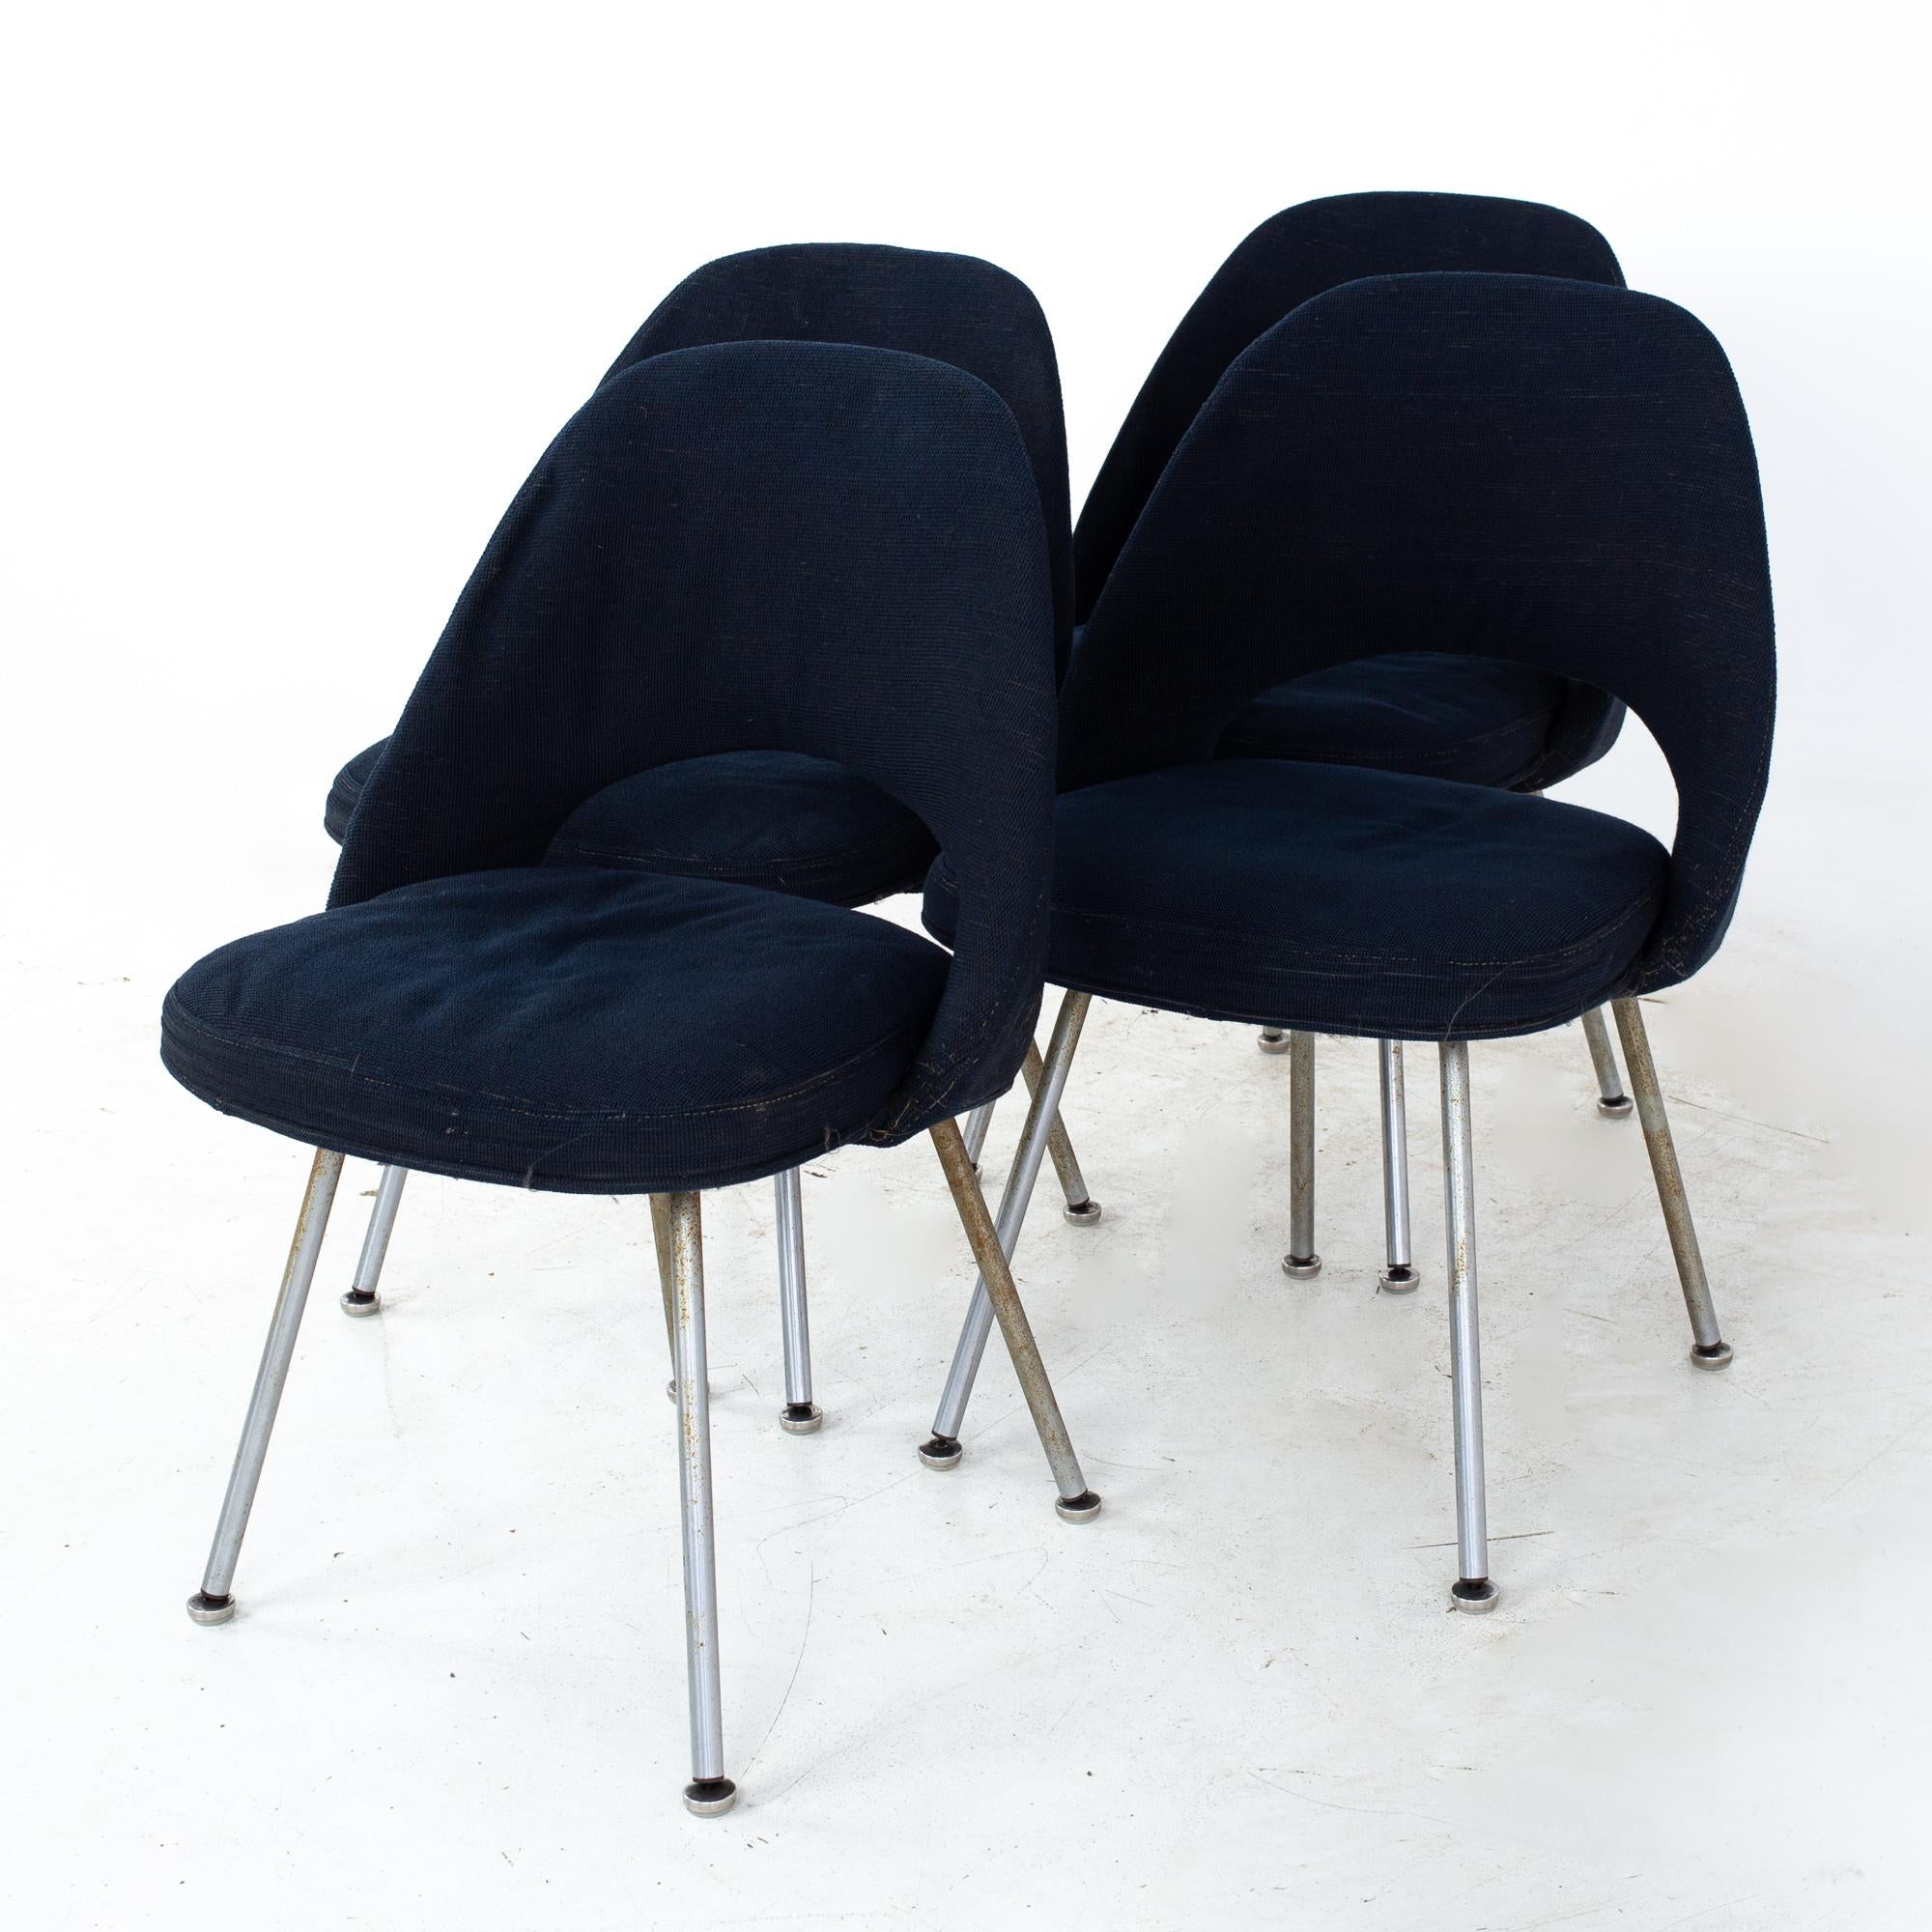 Late 20th Century Eero Saarinen for Knoll Mid Century Executive Dining Chairs - Set of 6